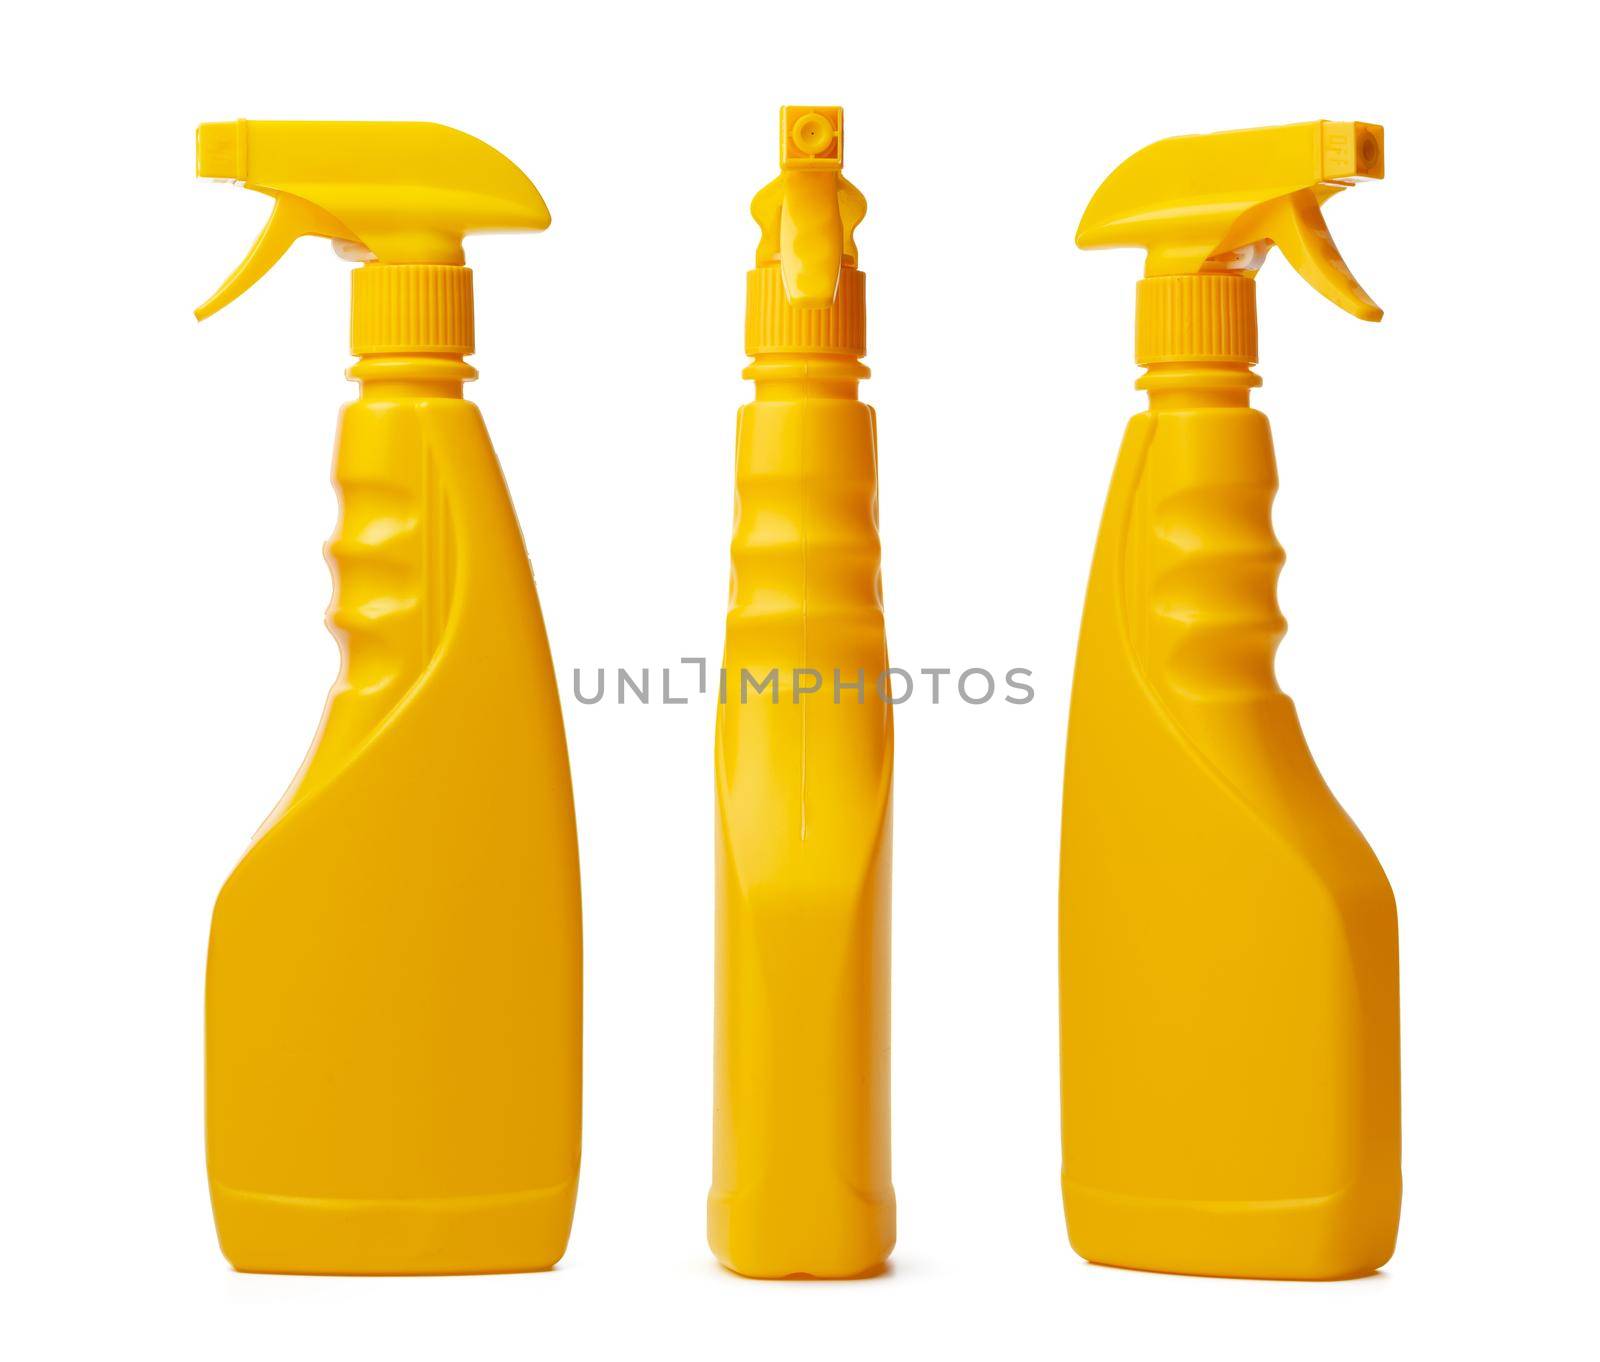 Cleaning spray bottle isolated on white background, copy space